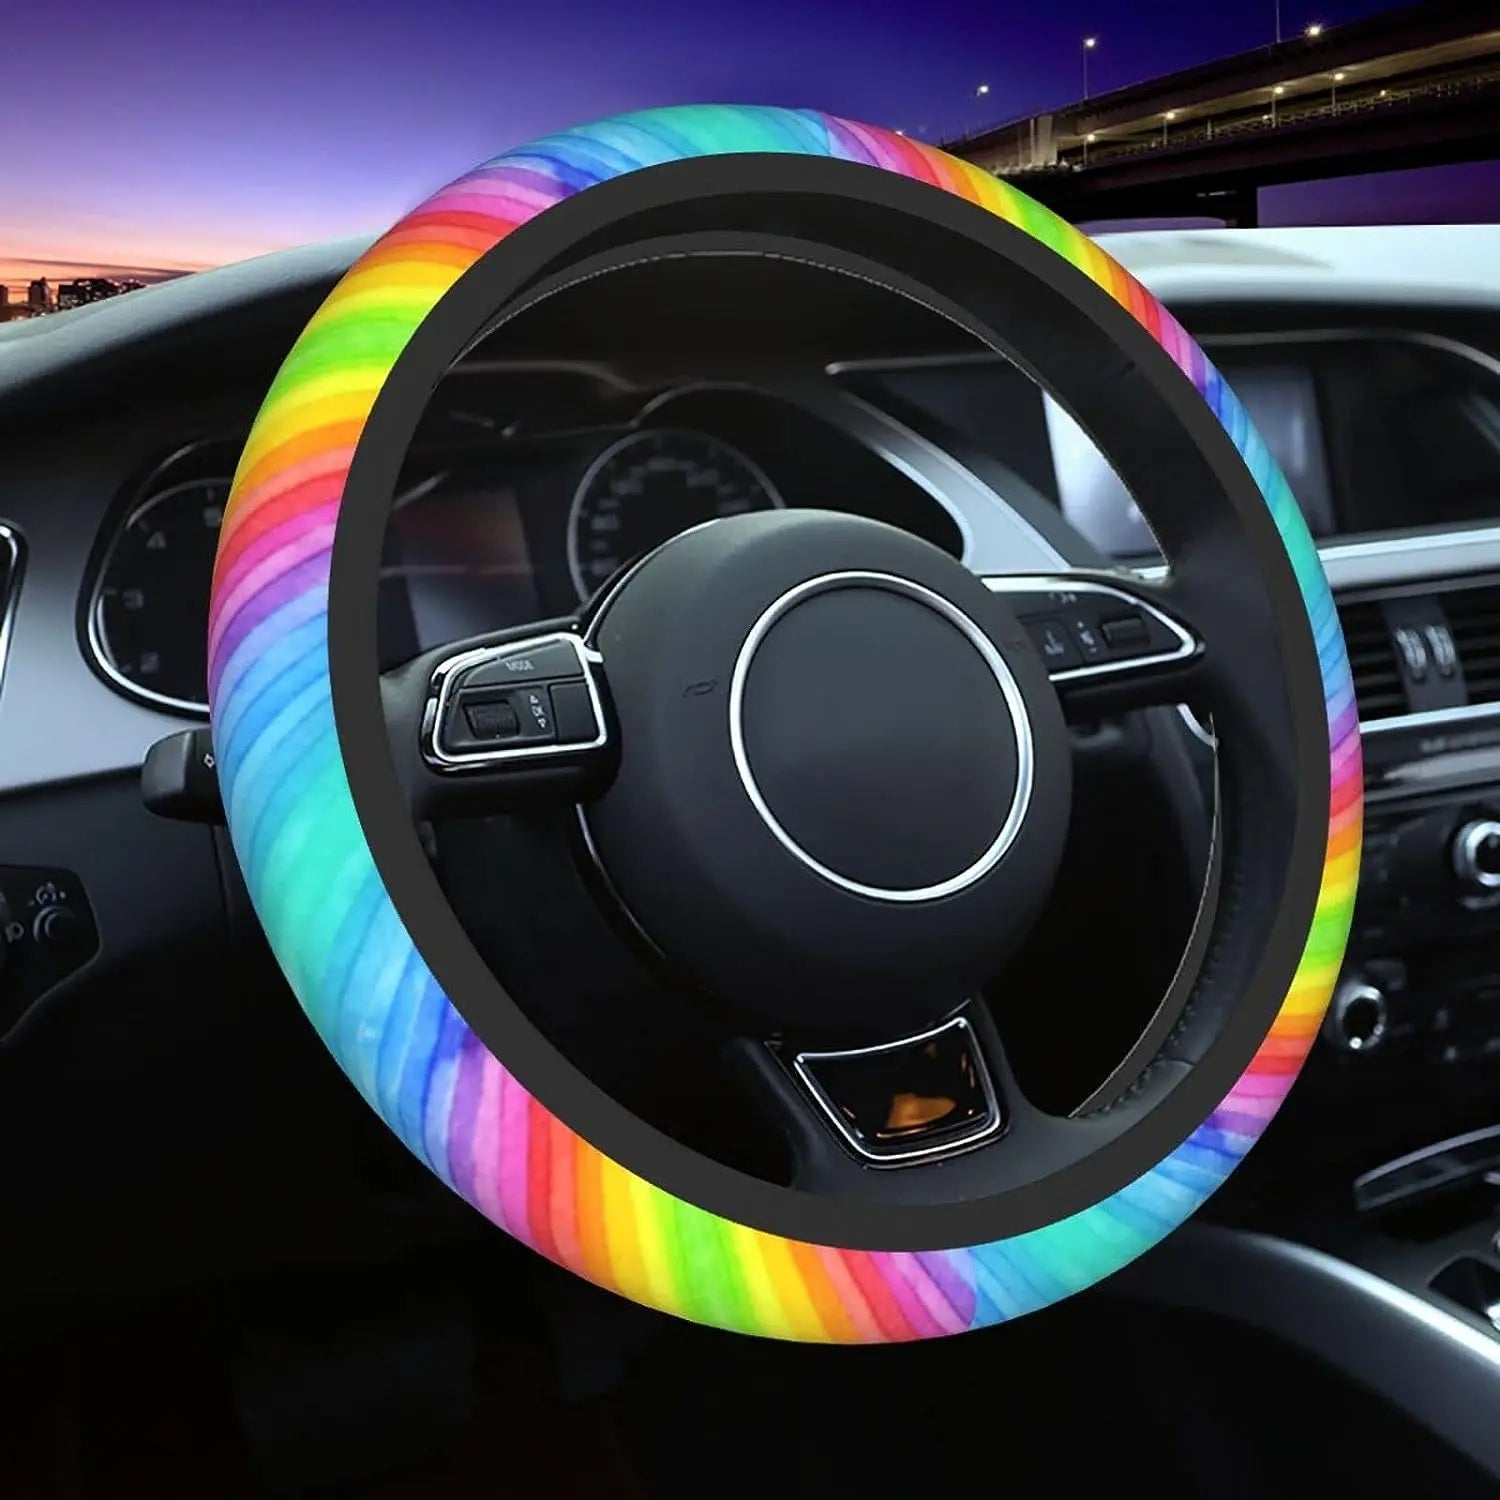 Retro Rainbow Stripes Steering Wheel Cover for Women, Bright Rainbows, Colorful Car Steering Wheel Cover Cute, Car Wheel Cover, Aesthetic Car Decor, Car Gift, Car Accessories 27